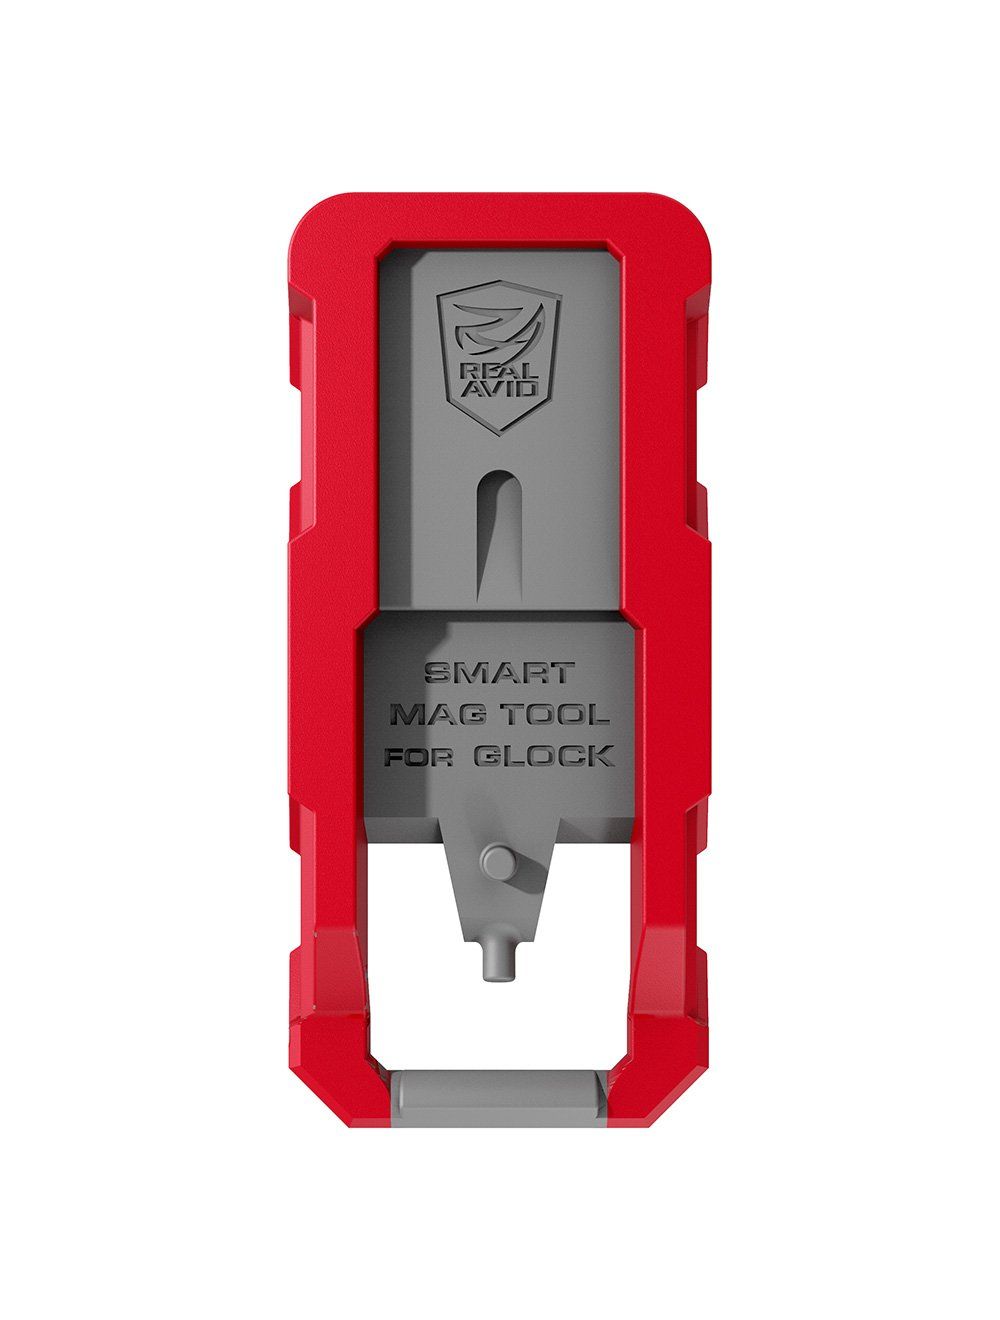 Smart Mag Tool for Glock